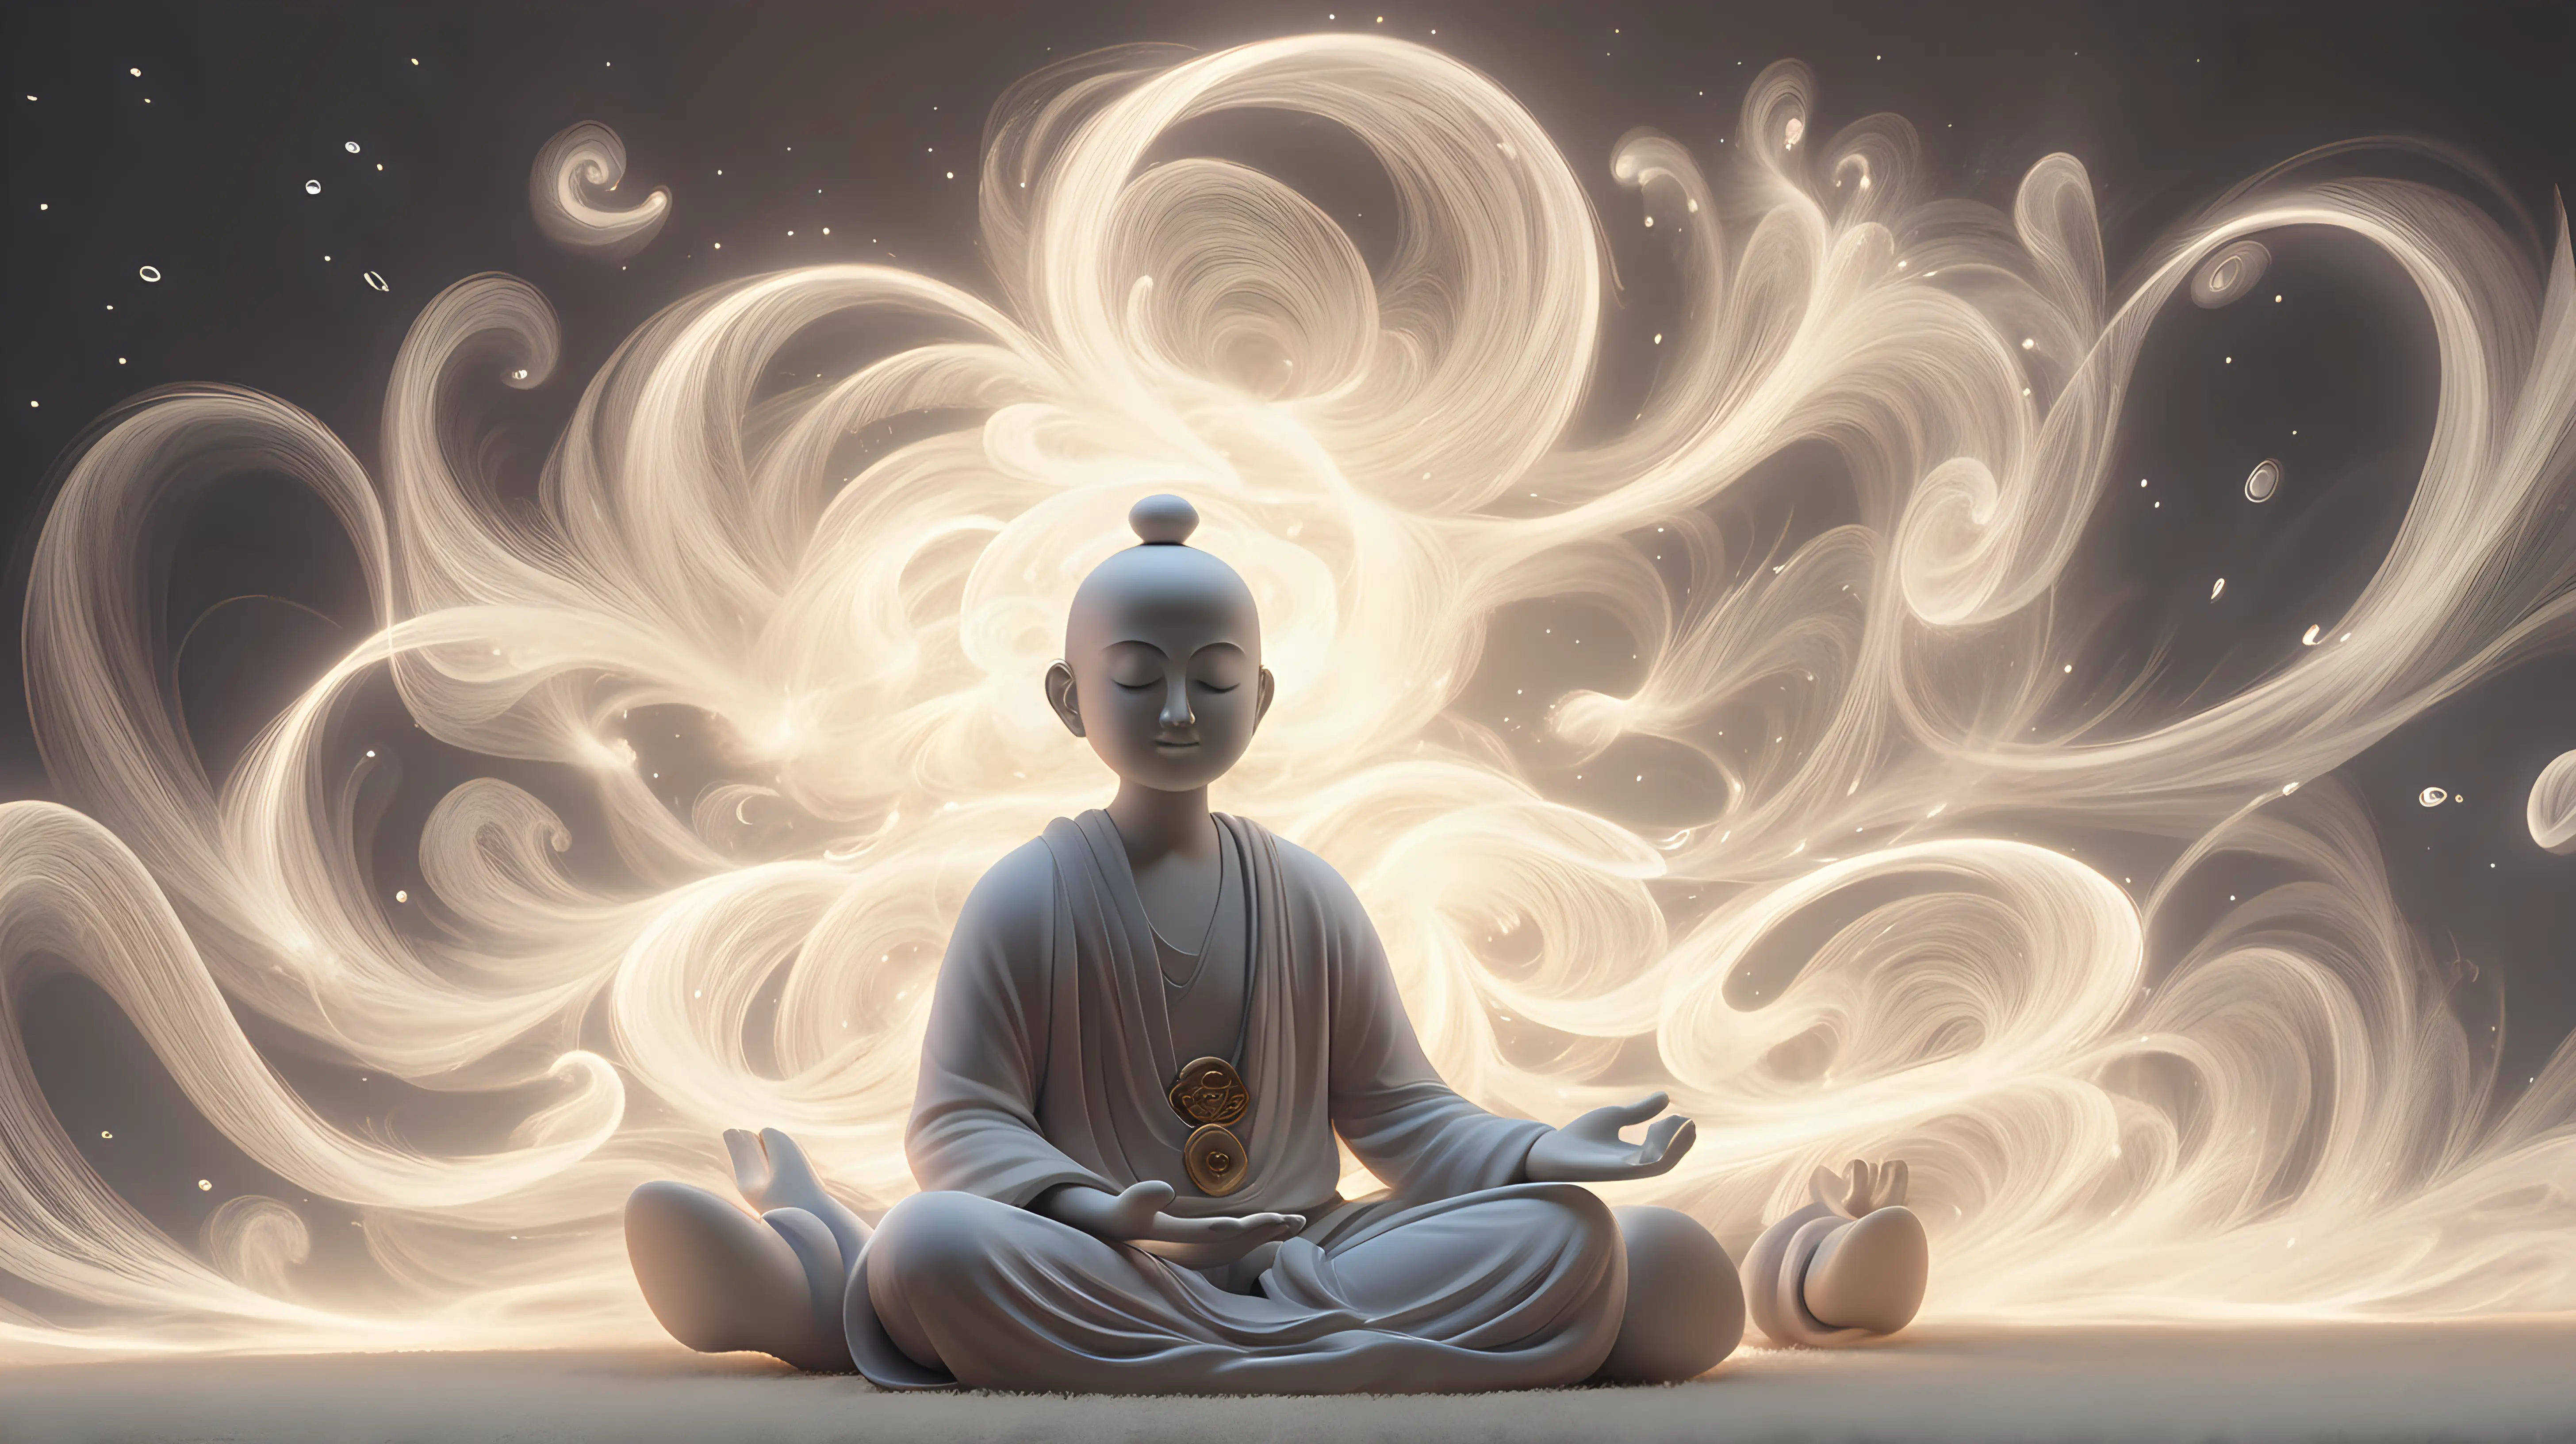 An endearing, small figure with a serene expression, meditating peacefully amidst swirling wisps of energy.